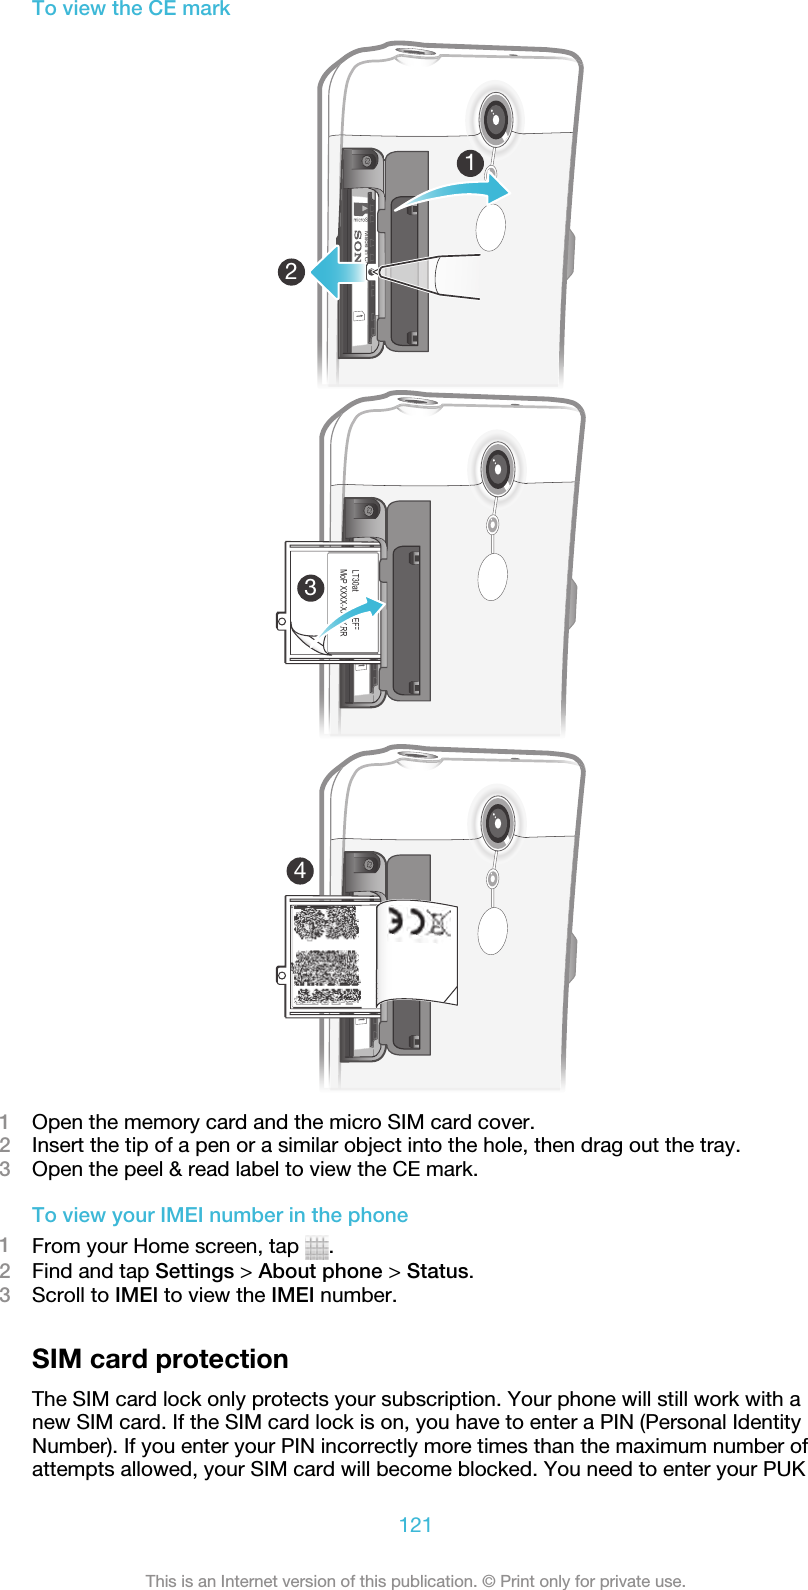 To view the CE mark12431Open the memory card and the micro SIM card cover.2Insert the tip of a pen or a similar object into the hole, then drag out the tray.3Open the peel &amp; read label to view the CE mark.To view your IMEI number in the phone1From your Home screen, tap  .2Find and tap Settings &gt; About phone &gt; Status.3Scroll to IMEI to view the IMEI number.SIM card protectionThe SIM card lock only protects your subscription. Your phone will still work with anew SIM card. If the SIM card lock is on, you have to enter a PIN (Personal IdentityNumber). If you enter your PIN incorrectly more times than the maximum number ofattempts allowed, your SIM card will become blocked. You need to enter your PUK121This is an Internet version of this publication. © Print only for private use.